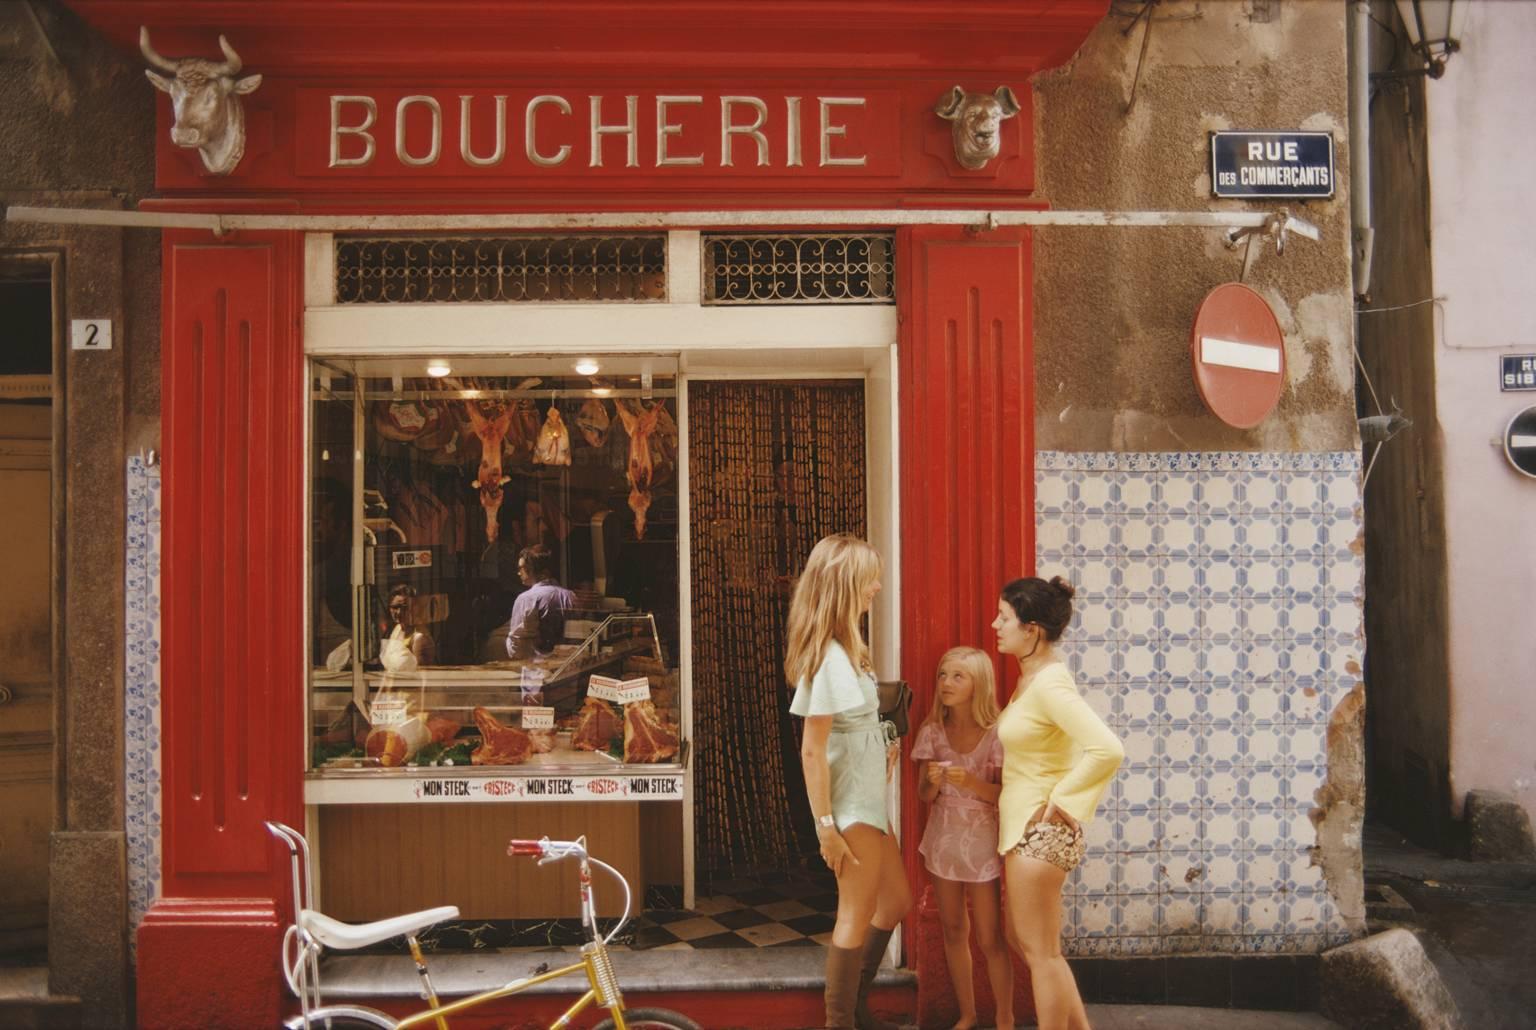 'Saint-Tropez Boucherie' by Slim Aarons

A boucherie or butcher's shop on Rue des Commercants in Saint-Tropez, on the French Riviera, August 1971.

Typically 'Slim' this photograph epitomises the vintage style and glamour of the period's wealthy and